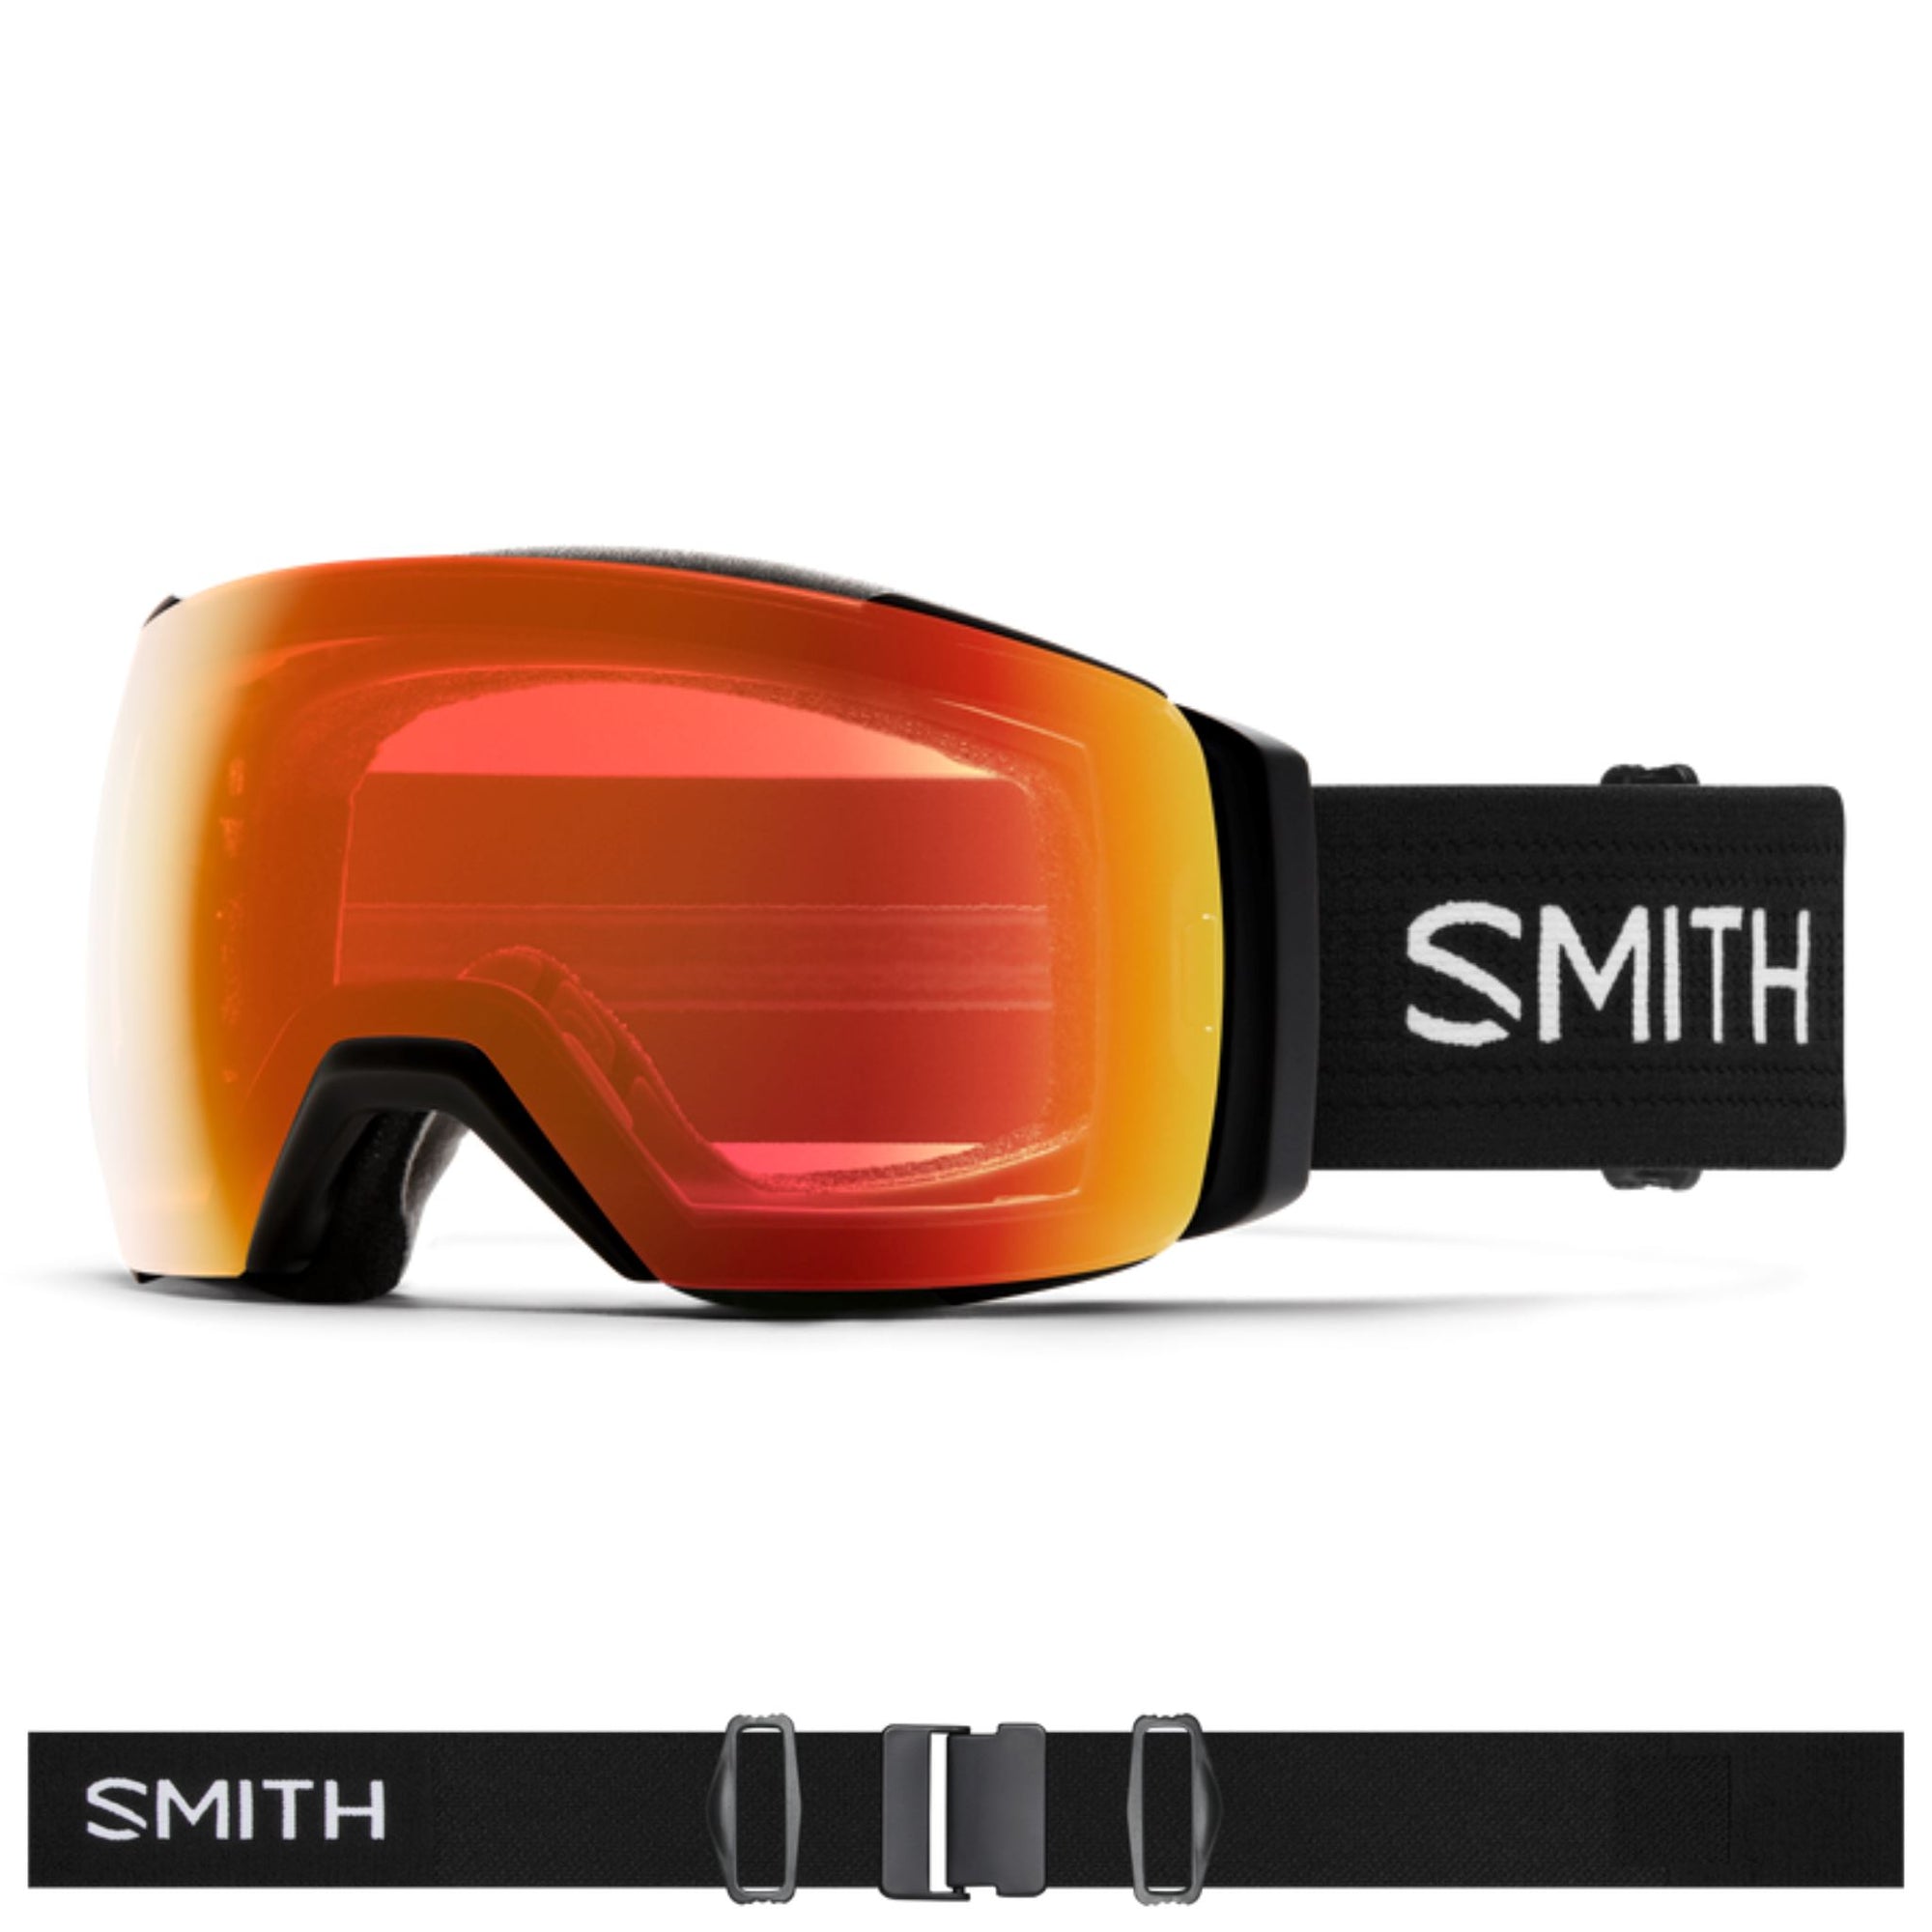 Smith I/O MAG XL Goggles (Large Fit) - Black ChromaPop Everyday Red Mirror Goggles Smith 